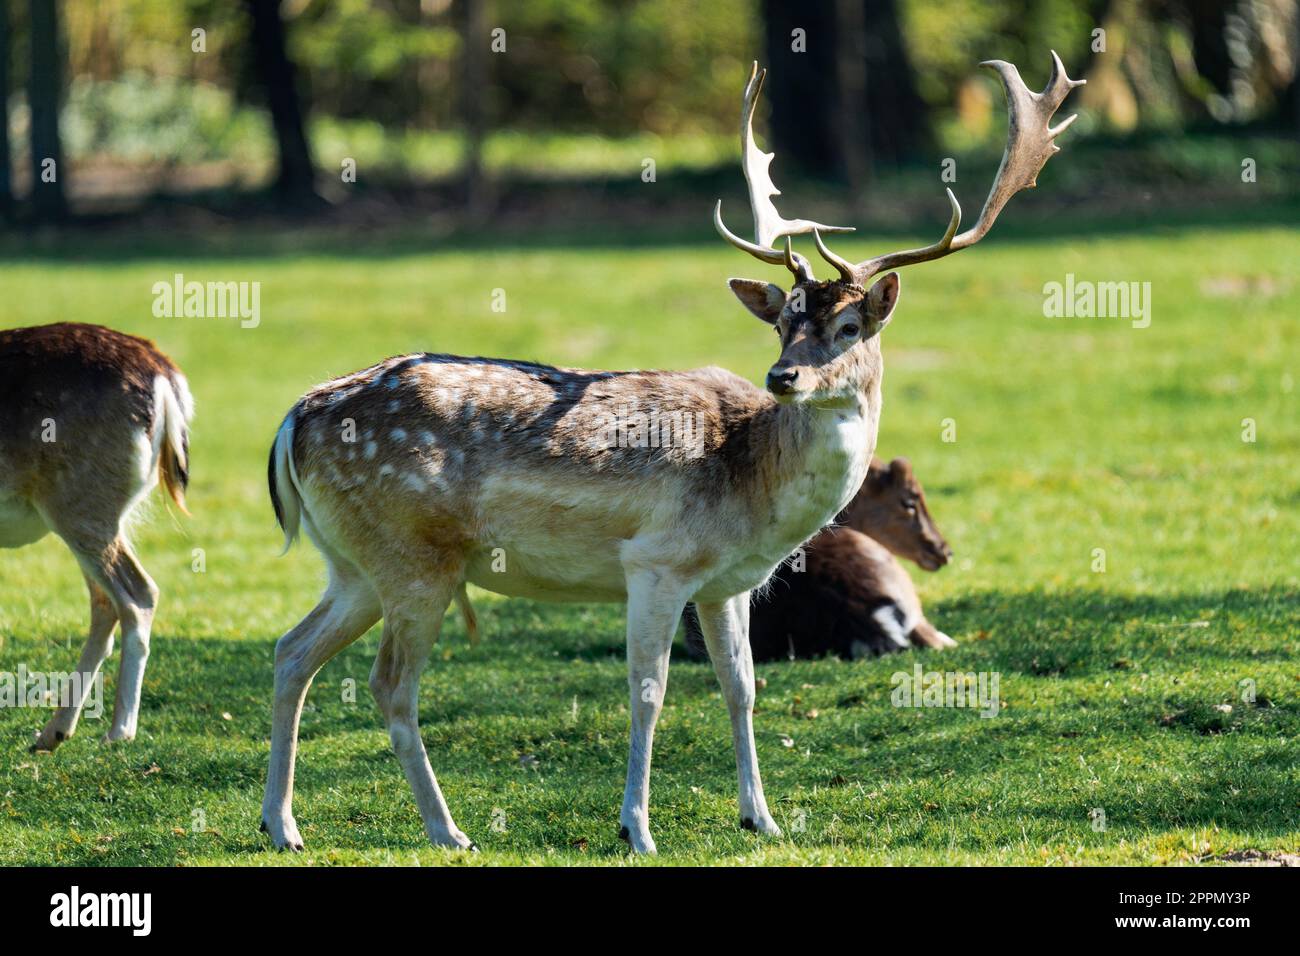 Male deer standing while being surrounded by female deers Stock Photo